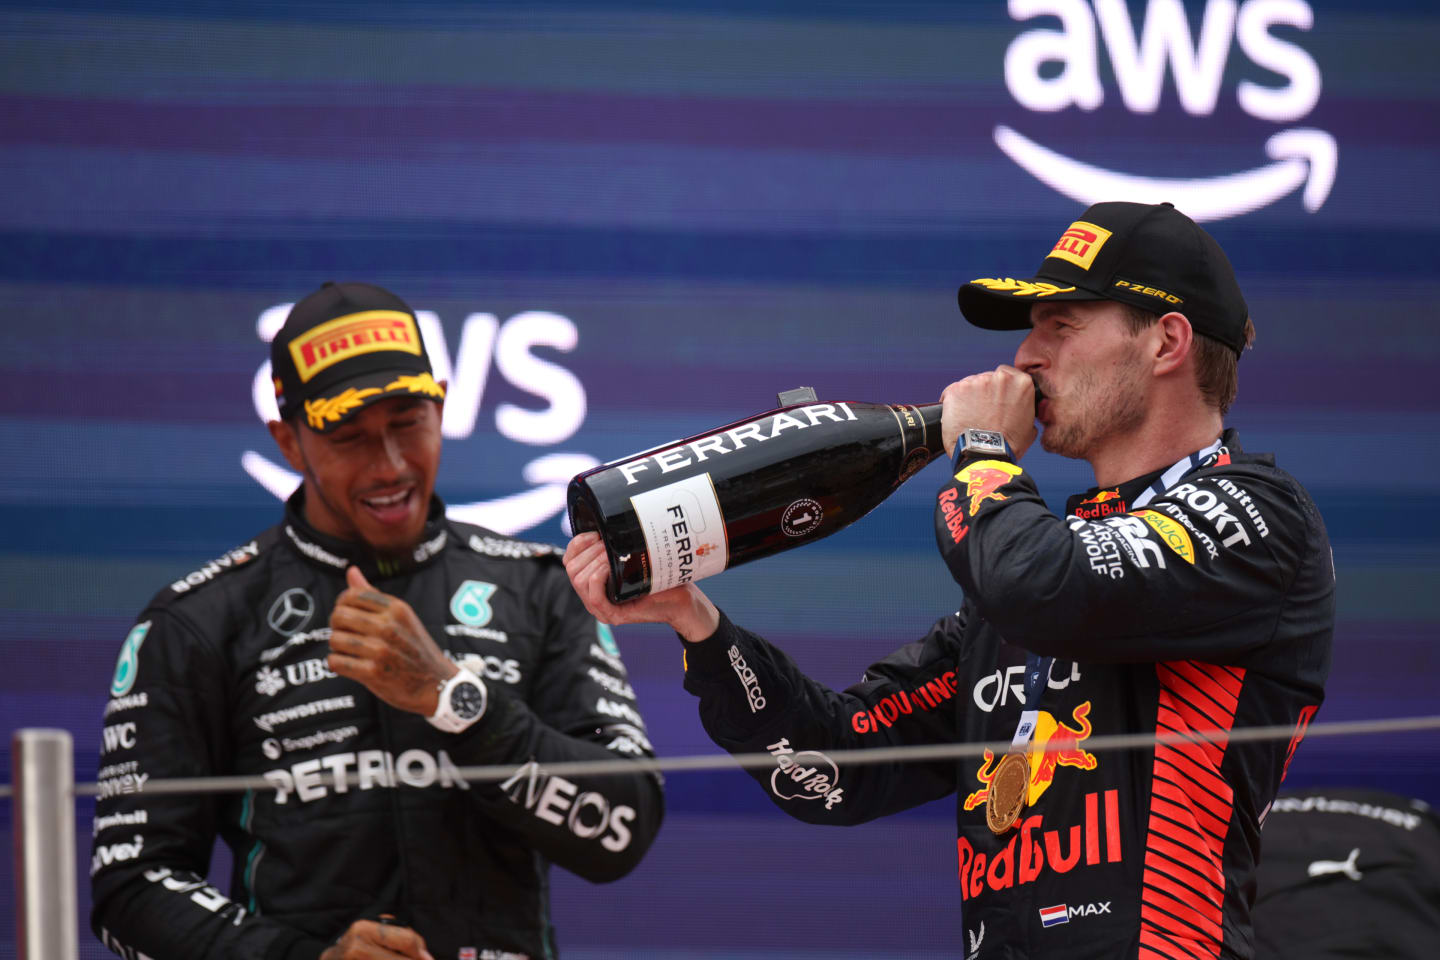 BARCELONA, SPAIN - JUNE 04: Race winner Max Verstappen of the Netherlands and Oracle Red Bull Racing and Second placed Lewis Hamilton of Great Britain and Mercedes celebrate on the podium during the F1 Grand Prix of Spain at Circuit de Barcelona-Catalunya on June 04, 2023 in Barcelona, Spain. (Photo by Adam Pretty/Getty Images)